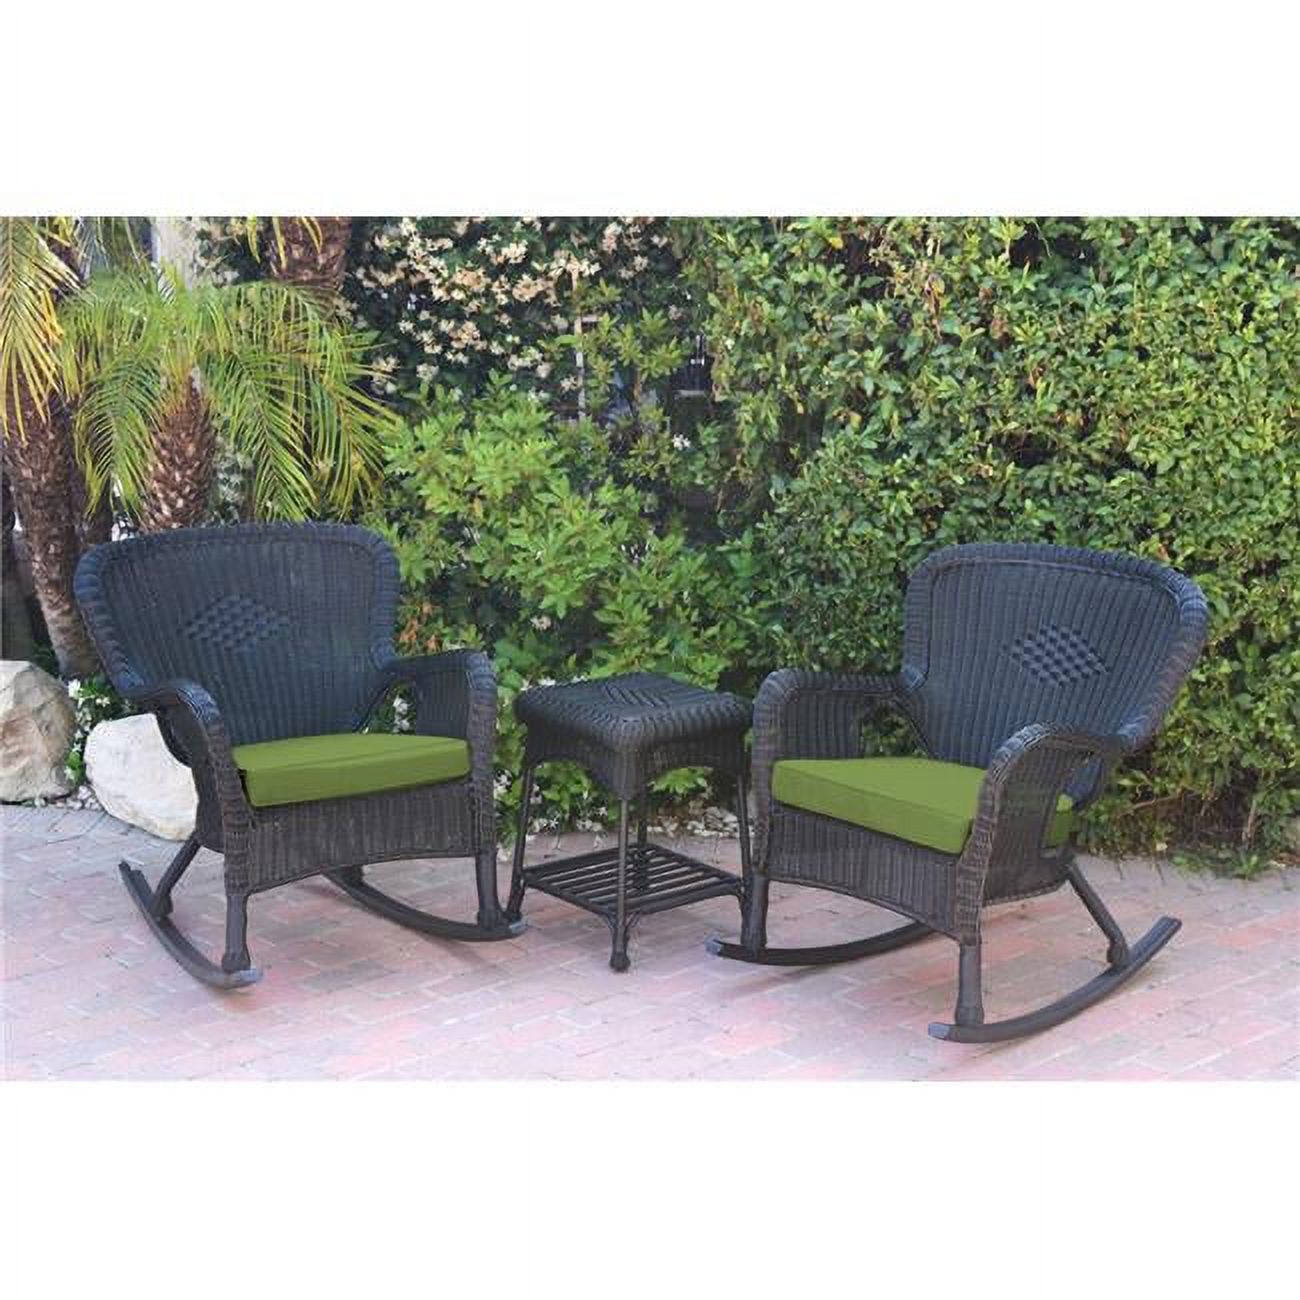 W00214-2-RCES029 Windsor Black Wicker Rocker Chair & End Table Set with Green Cushion - image 1 of 1